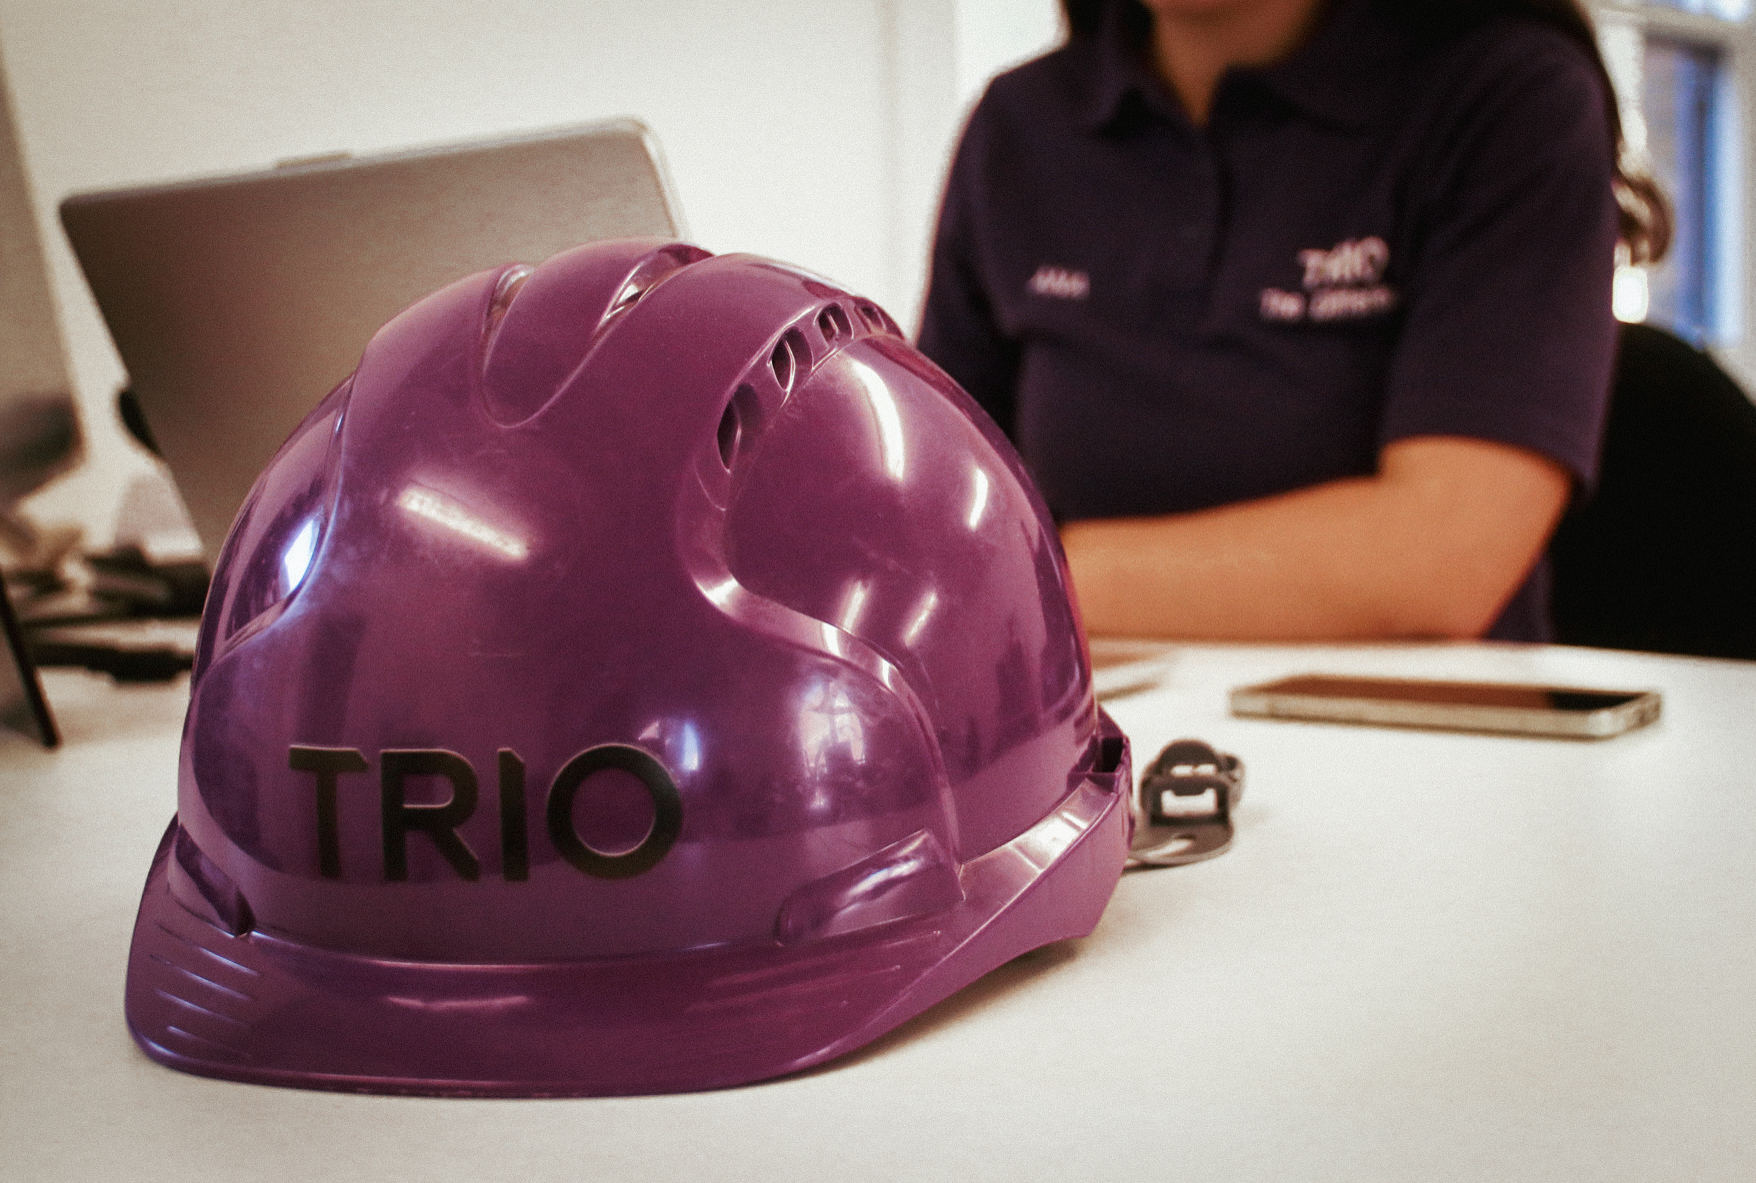 Purple TRIO hard hat on desk with admin team member in background